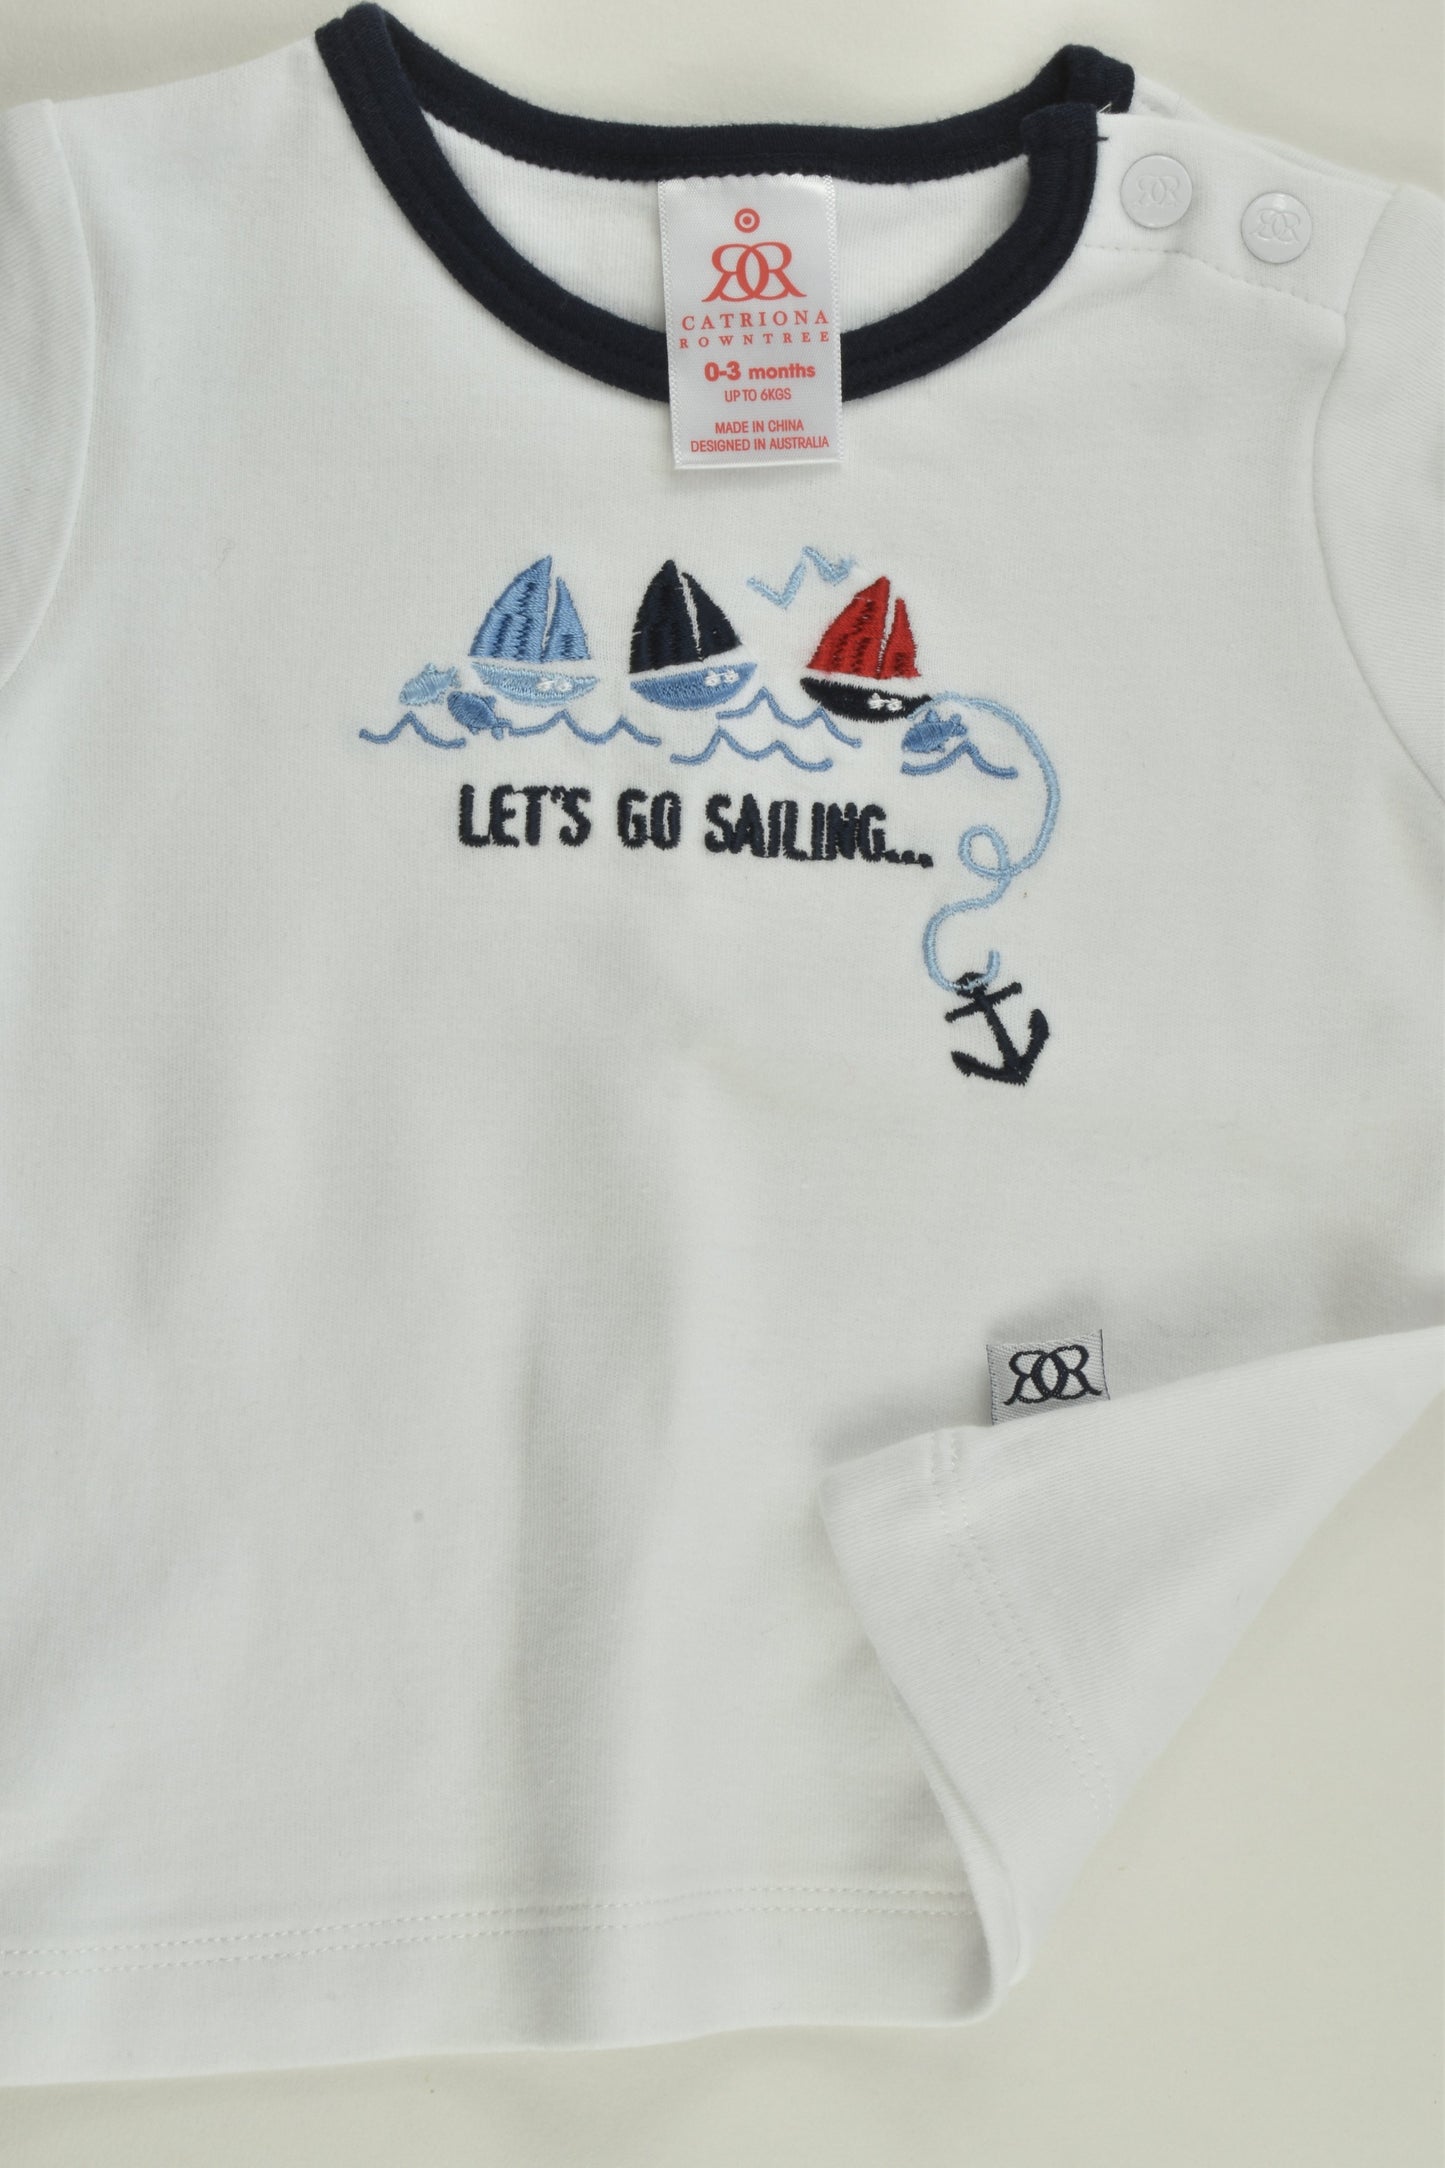 Catriona Rowntree Size 000 (0-3 months) 'Let's Go Sailing' T-shirt